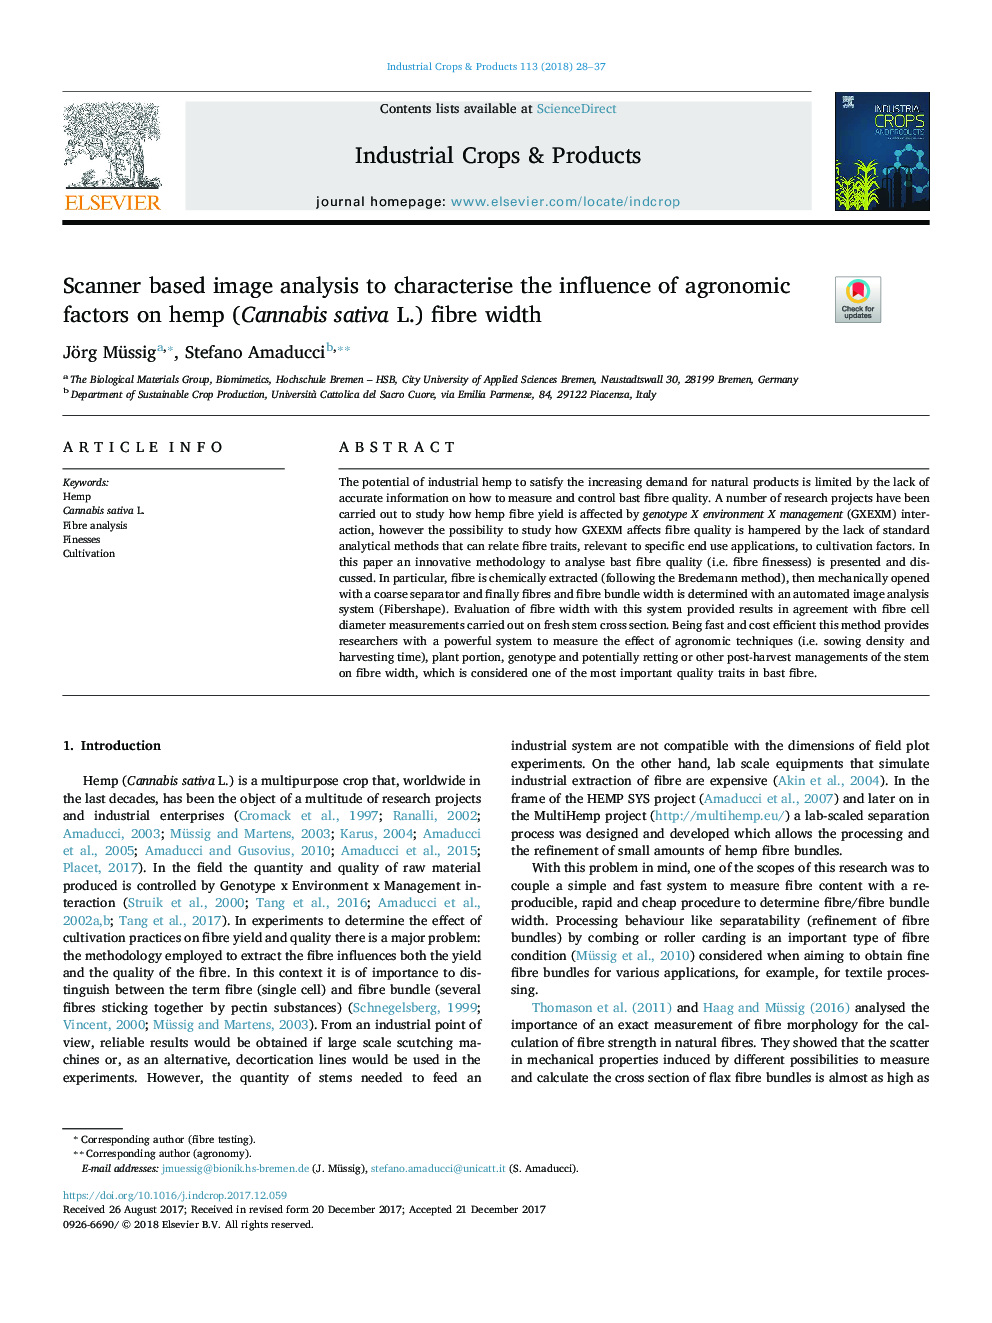 Scanner based image analysis to characterise the influence of agronomic factors on hemp (Cannabis sativa L.) fibre width